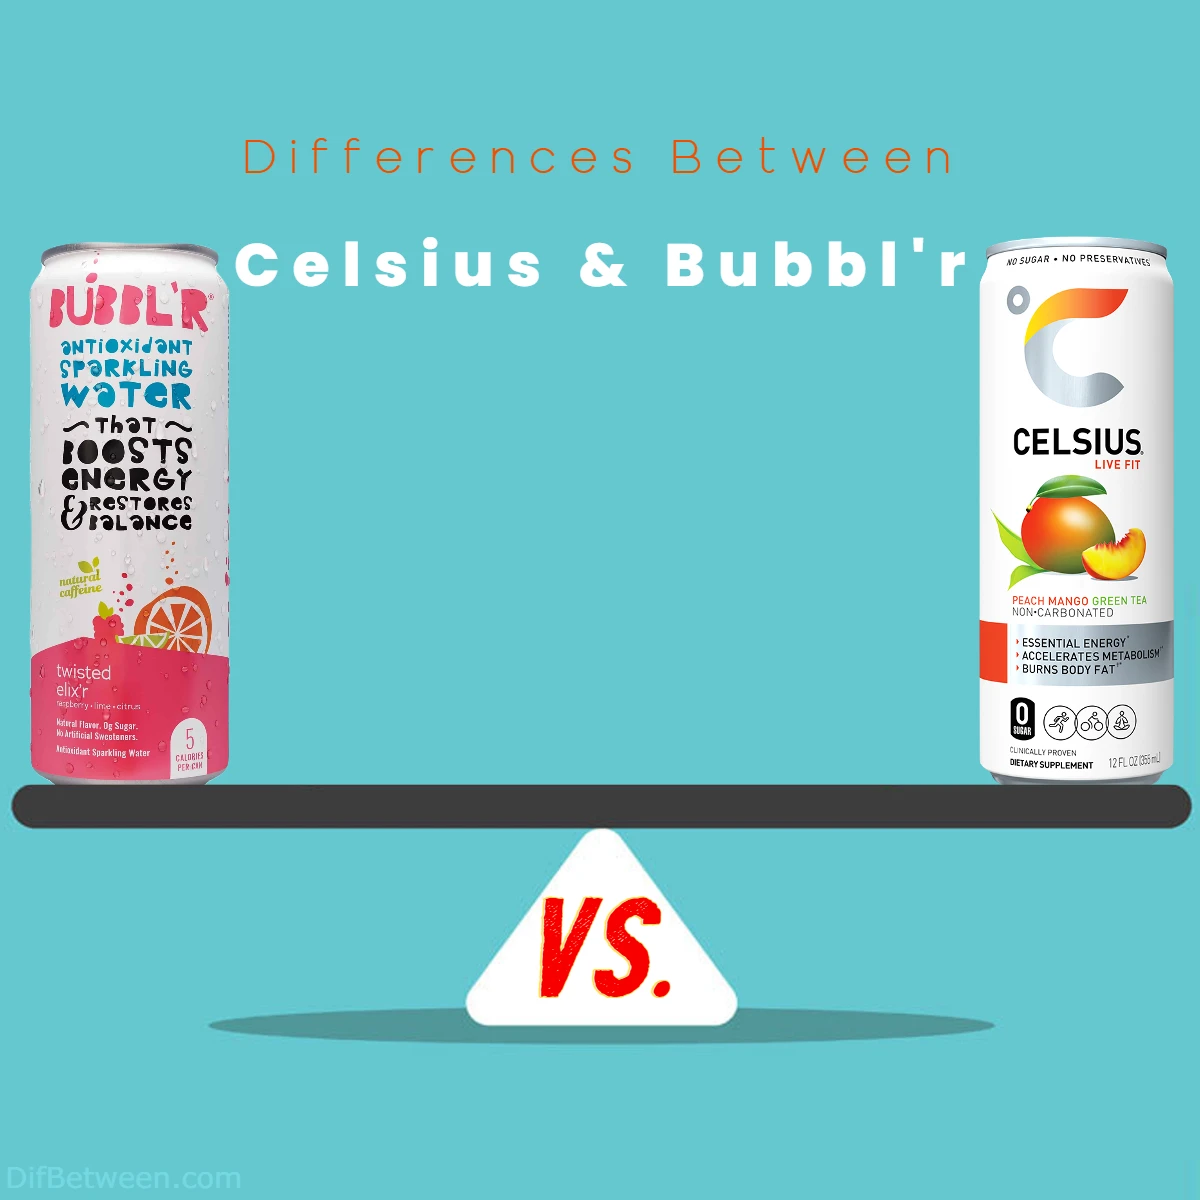 Difference Between Bubblr and Celsius